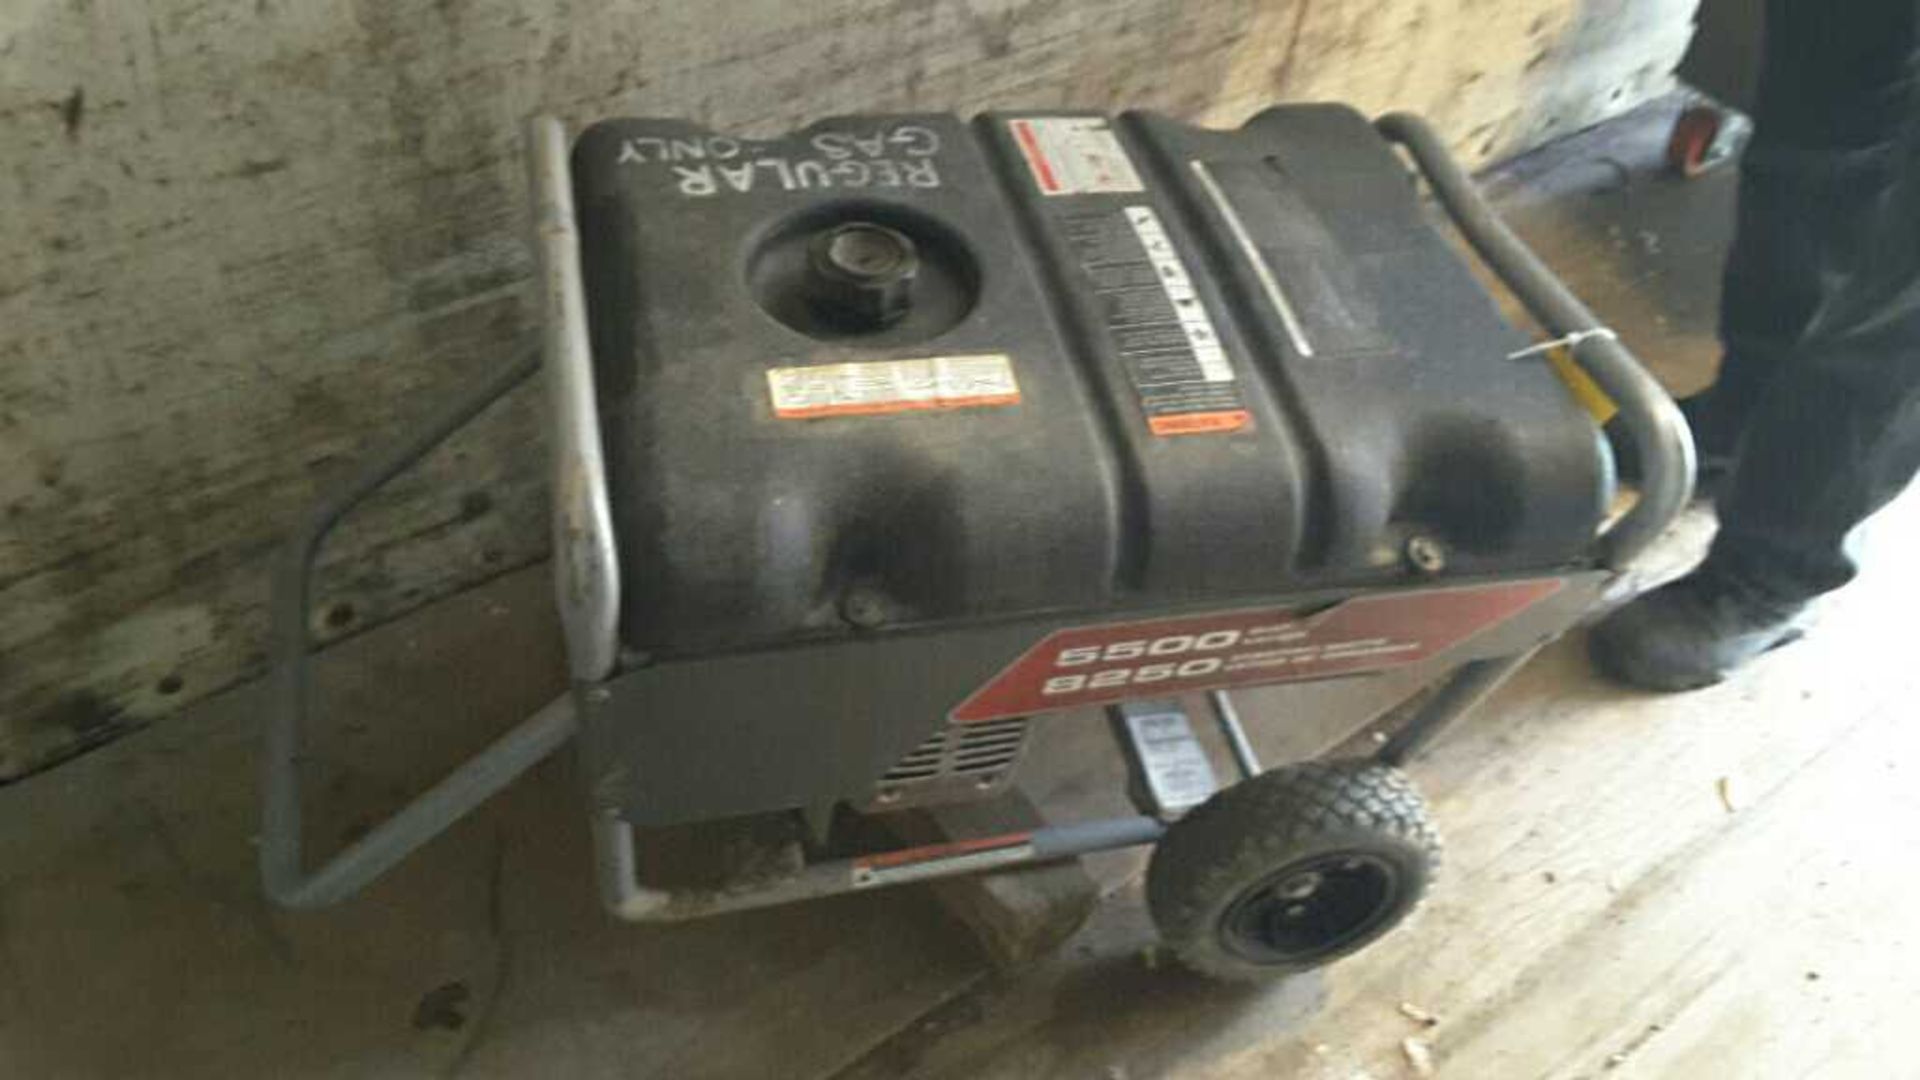 Generator with Briggs and Stratton motor